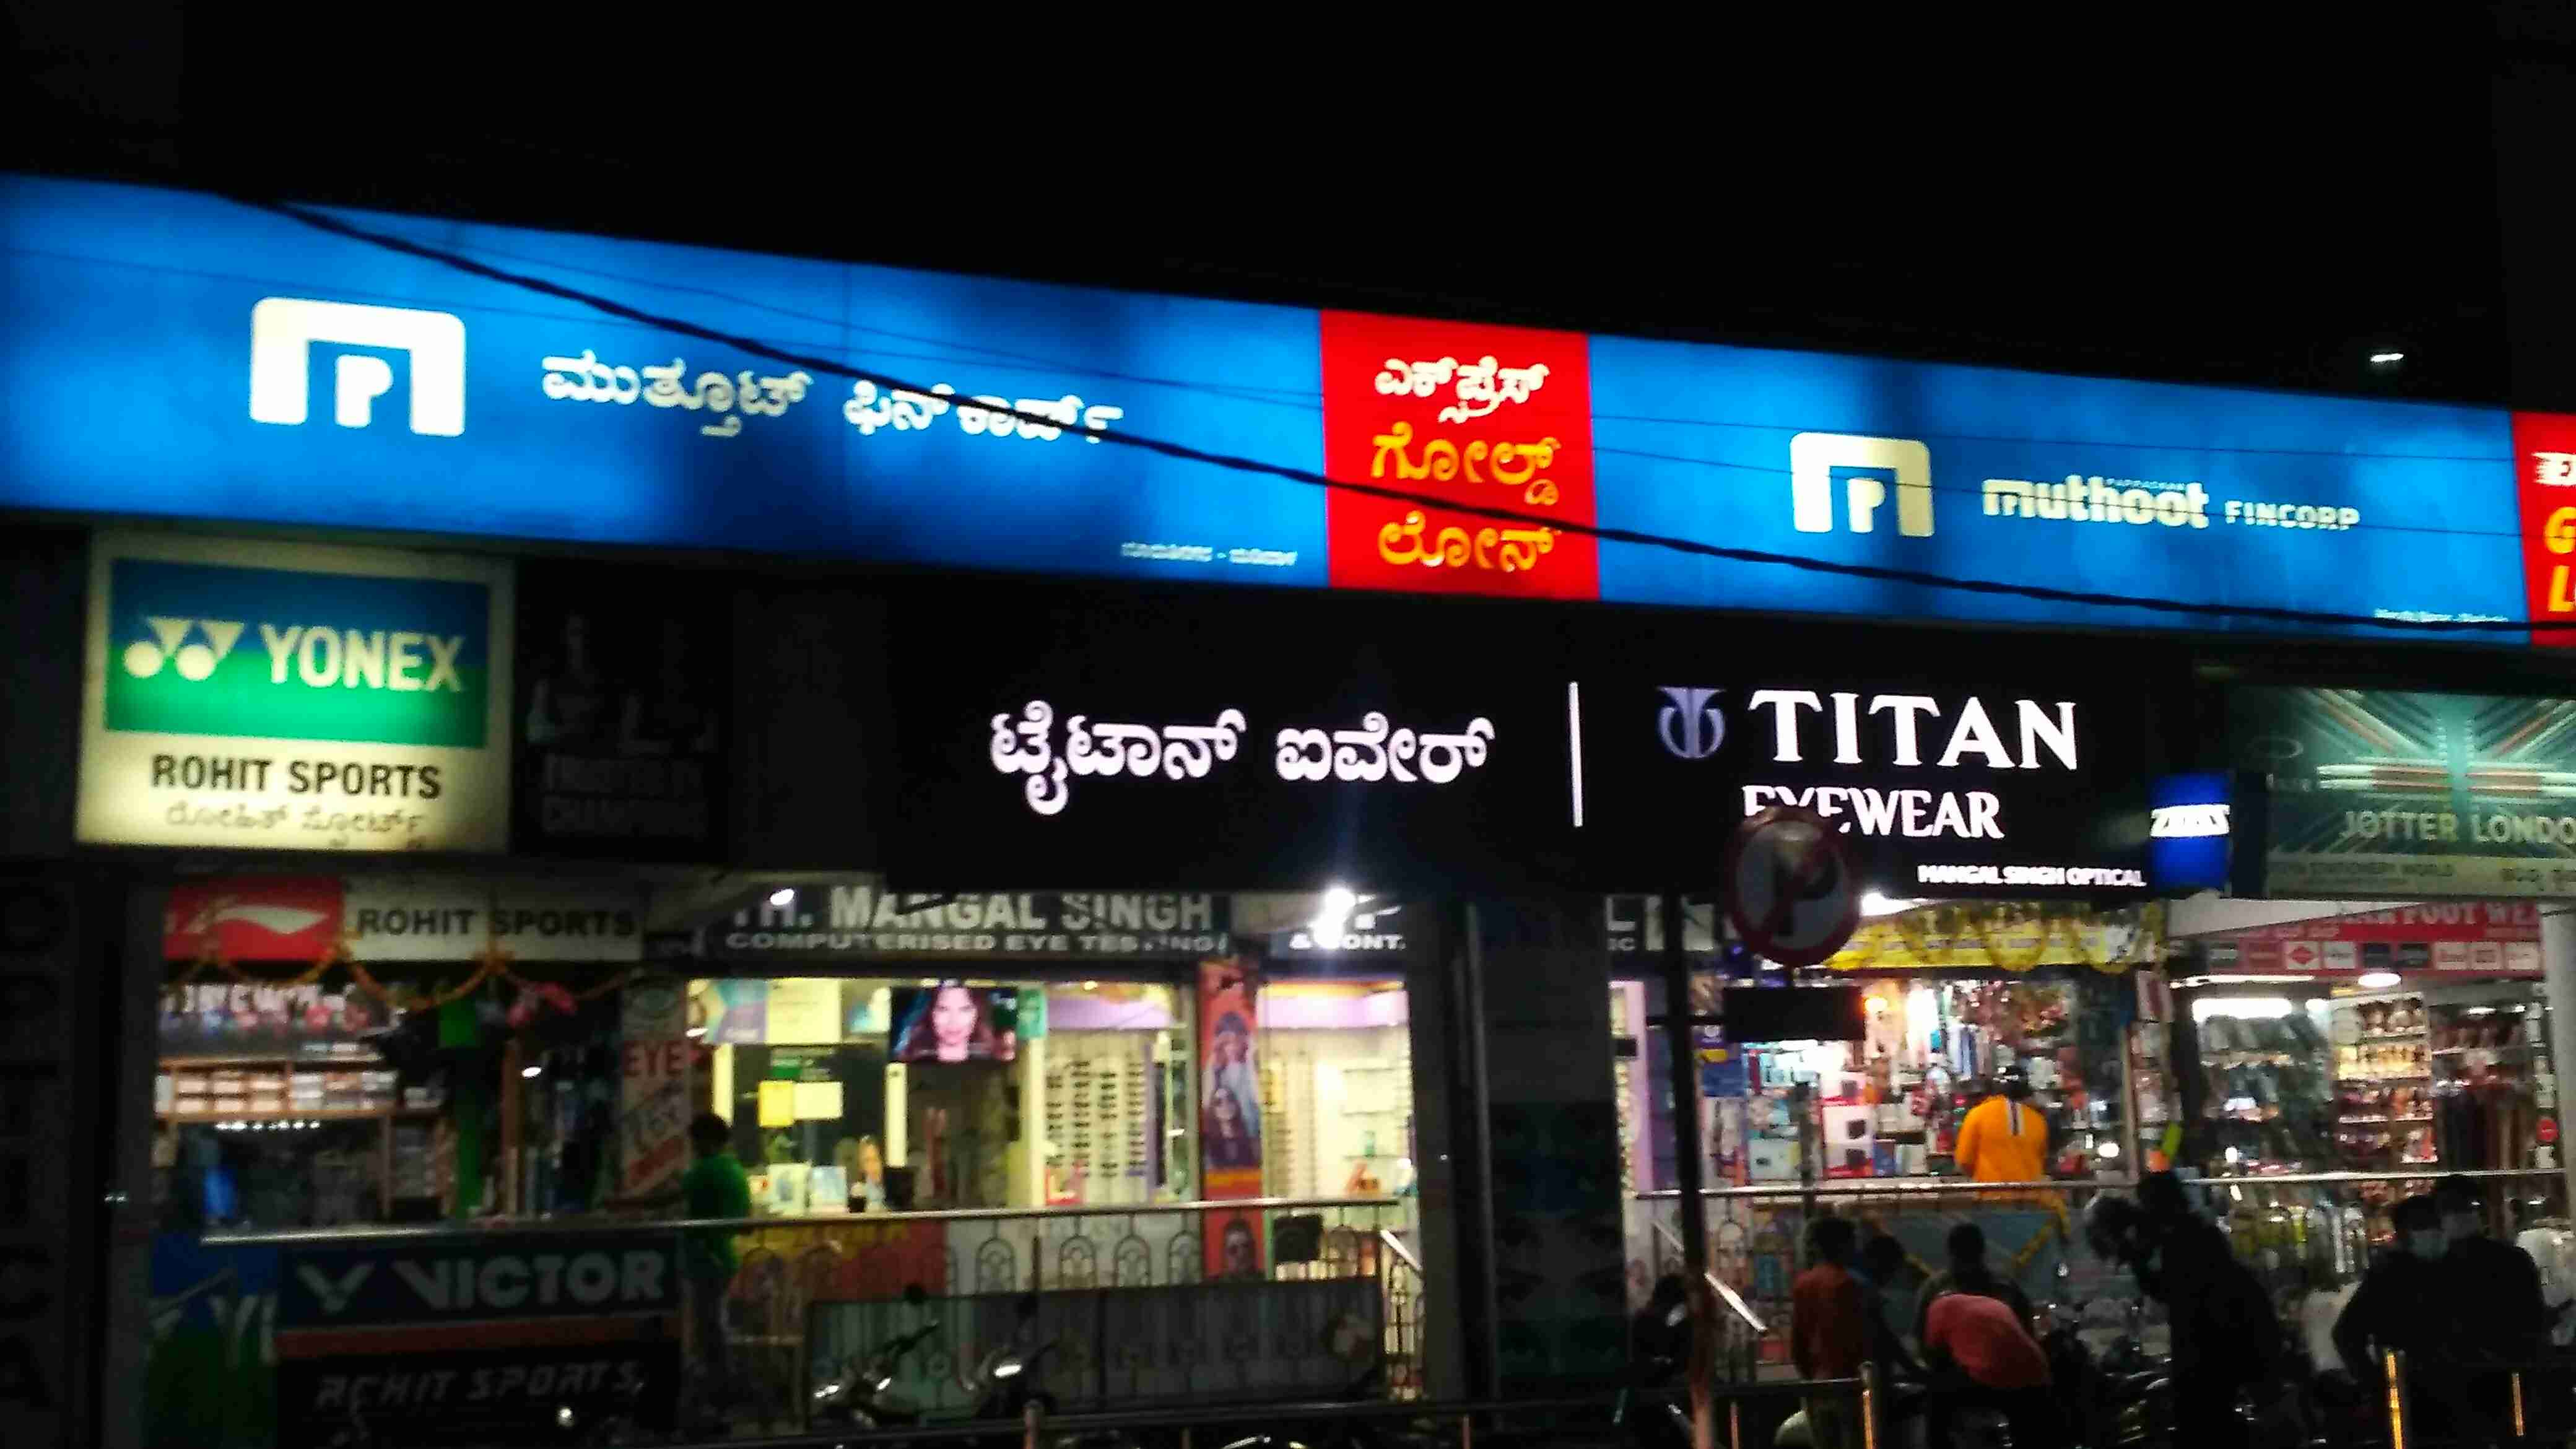 Photos and Videos of Muthoot Fincorp Gold Loan in Madiwala, Bangalore